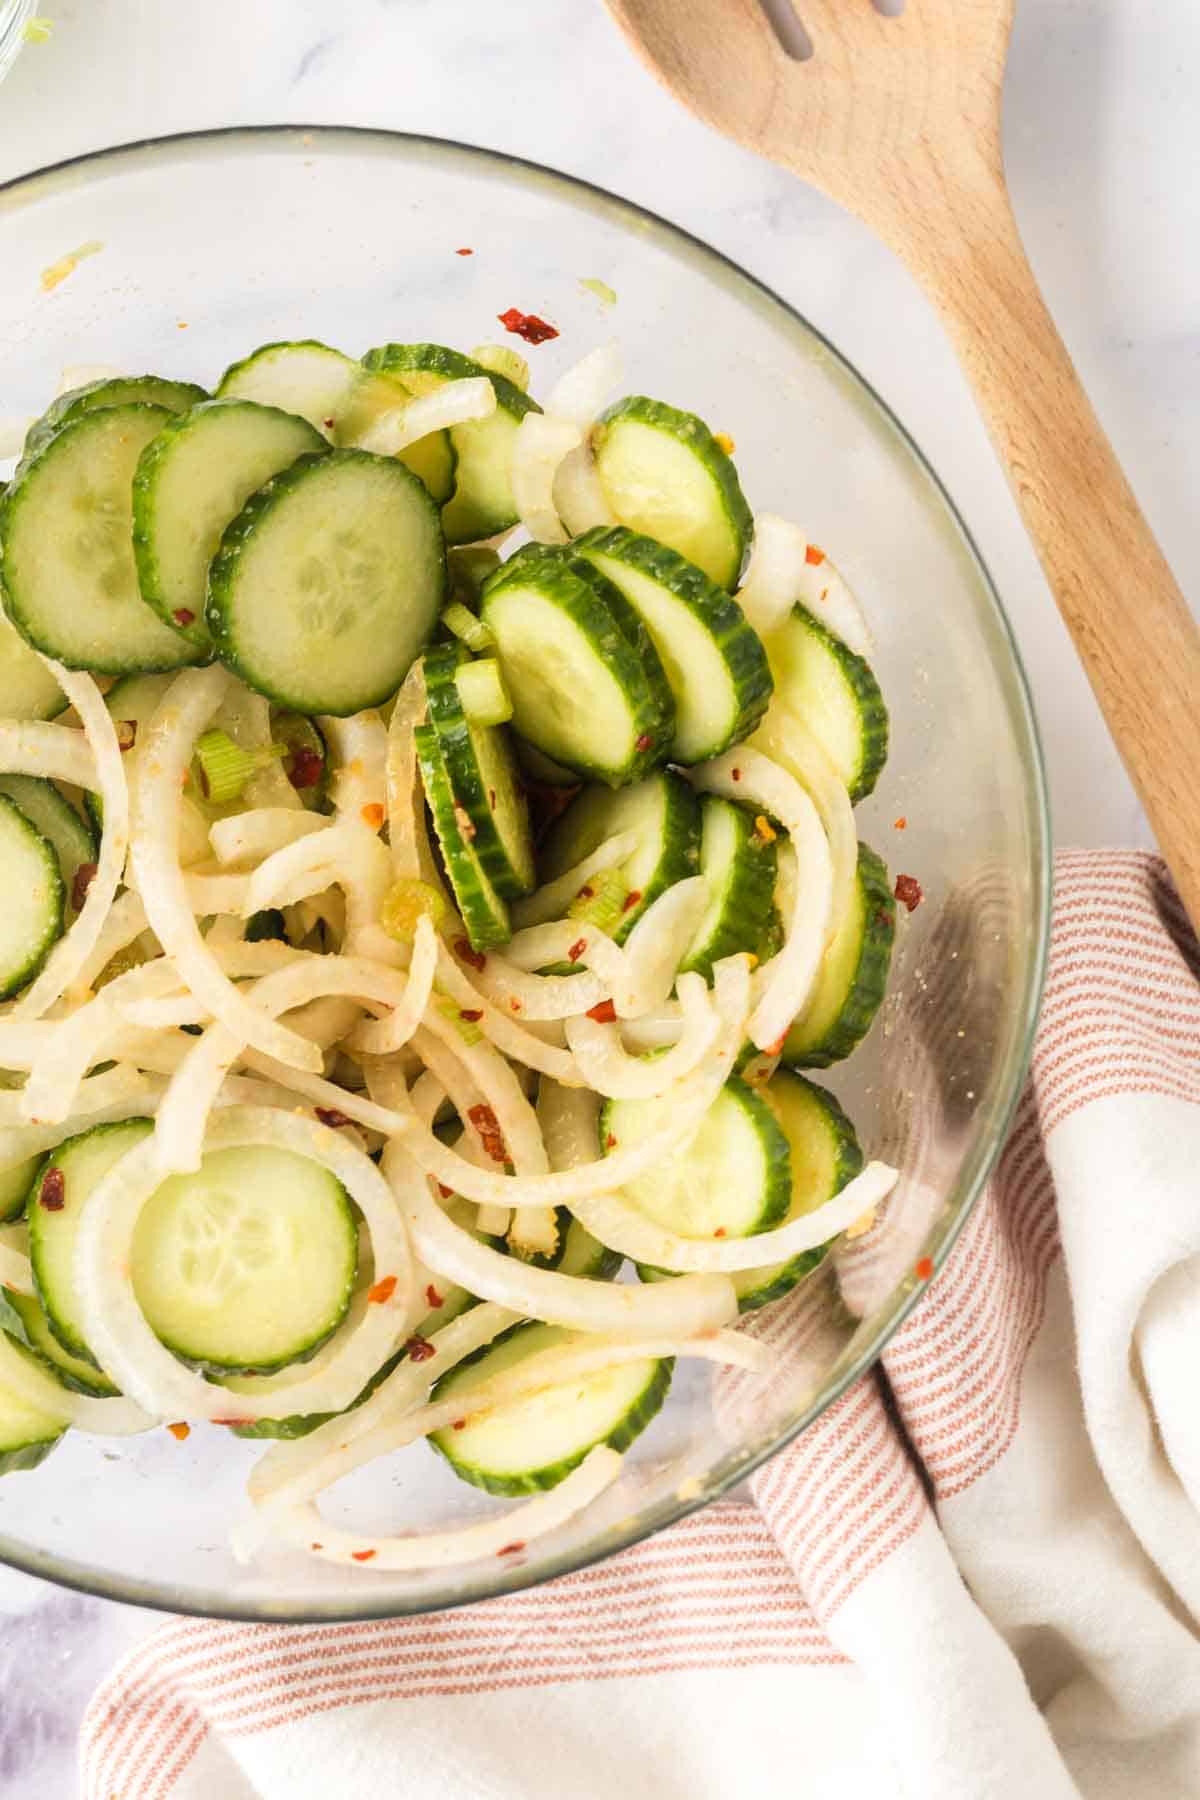 slices of cucumber and spices in a clear mixing bowl for korean cucumber salad